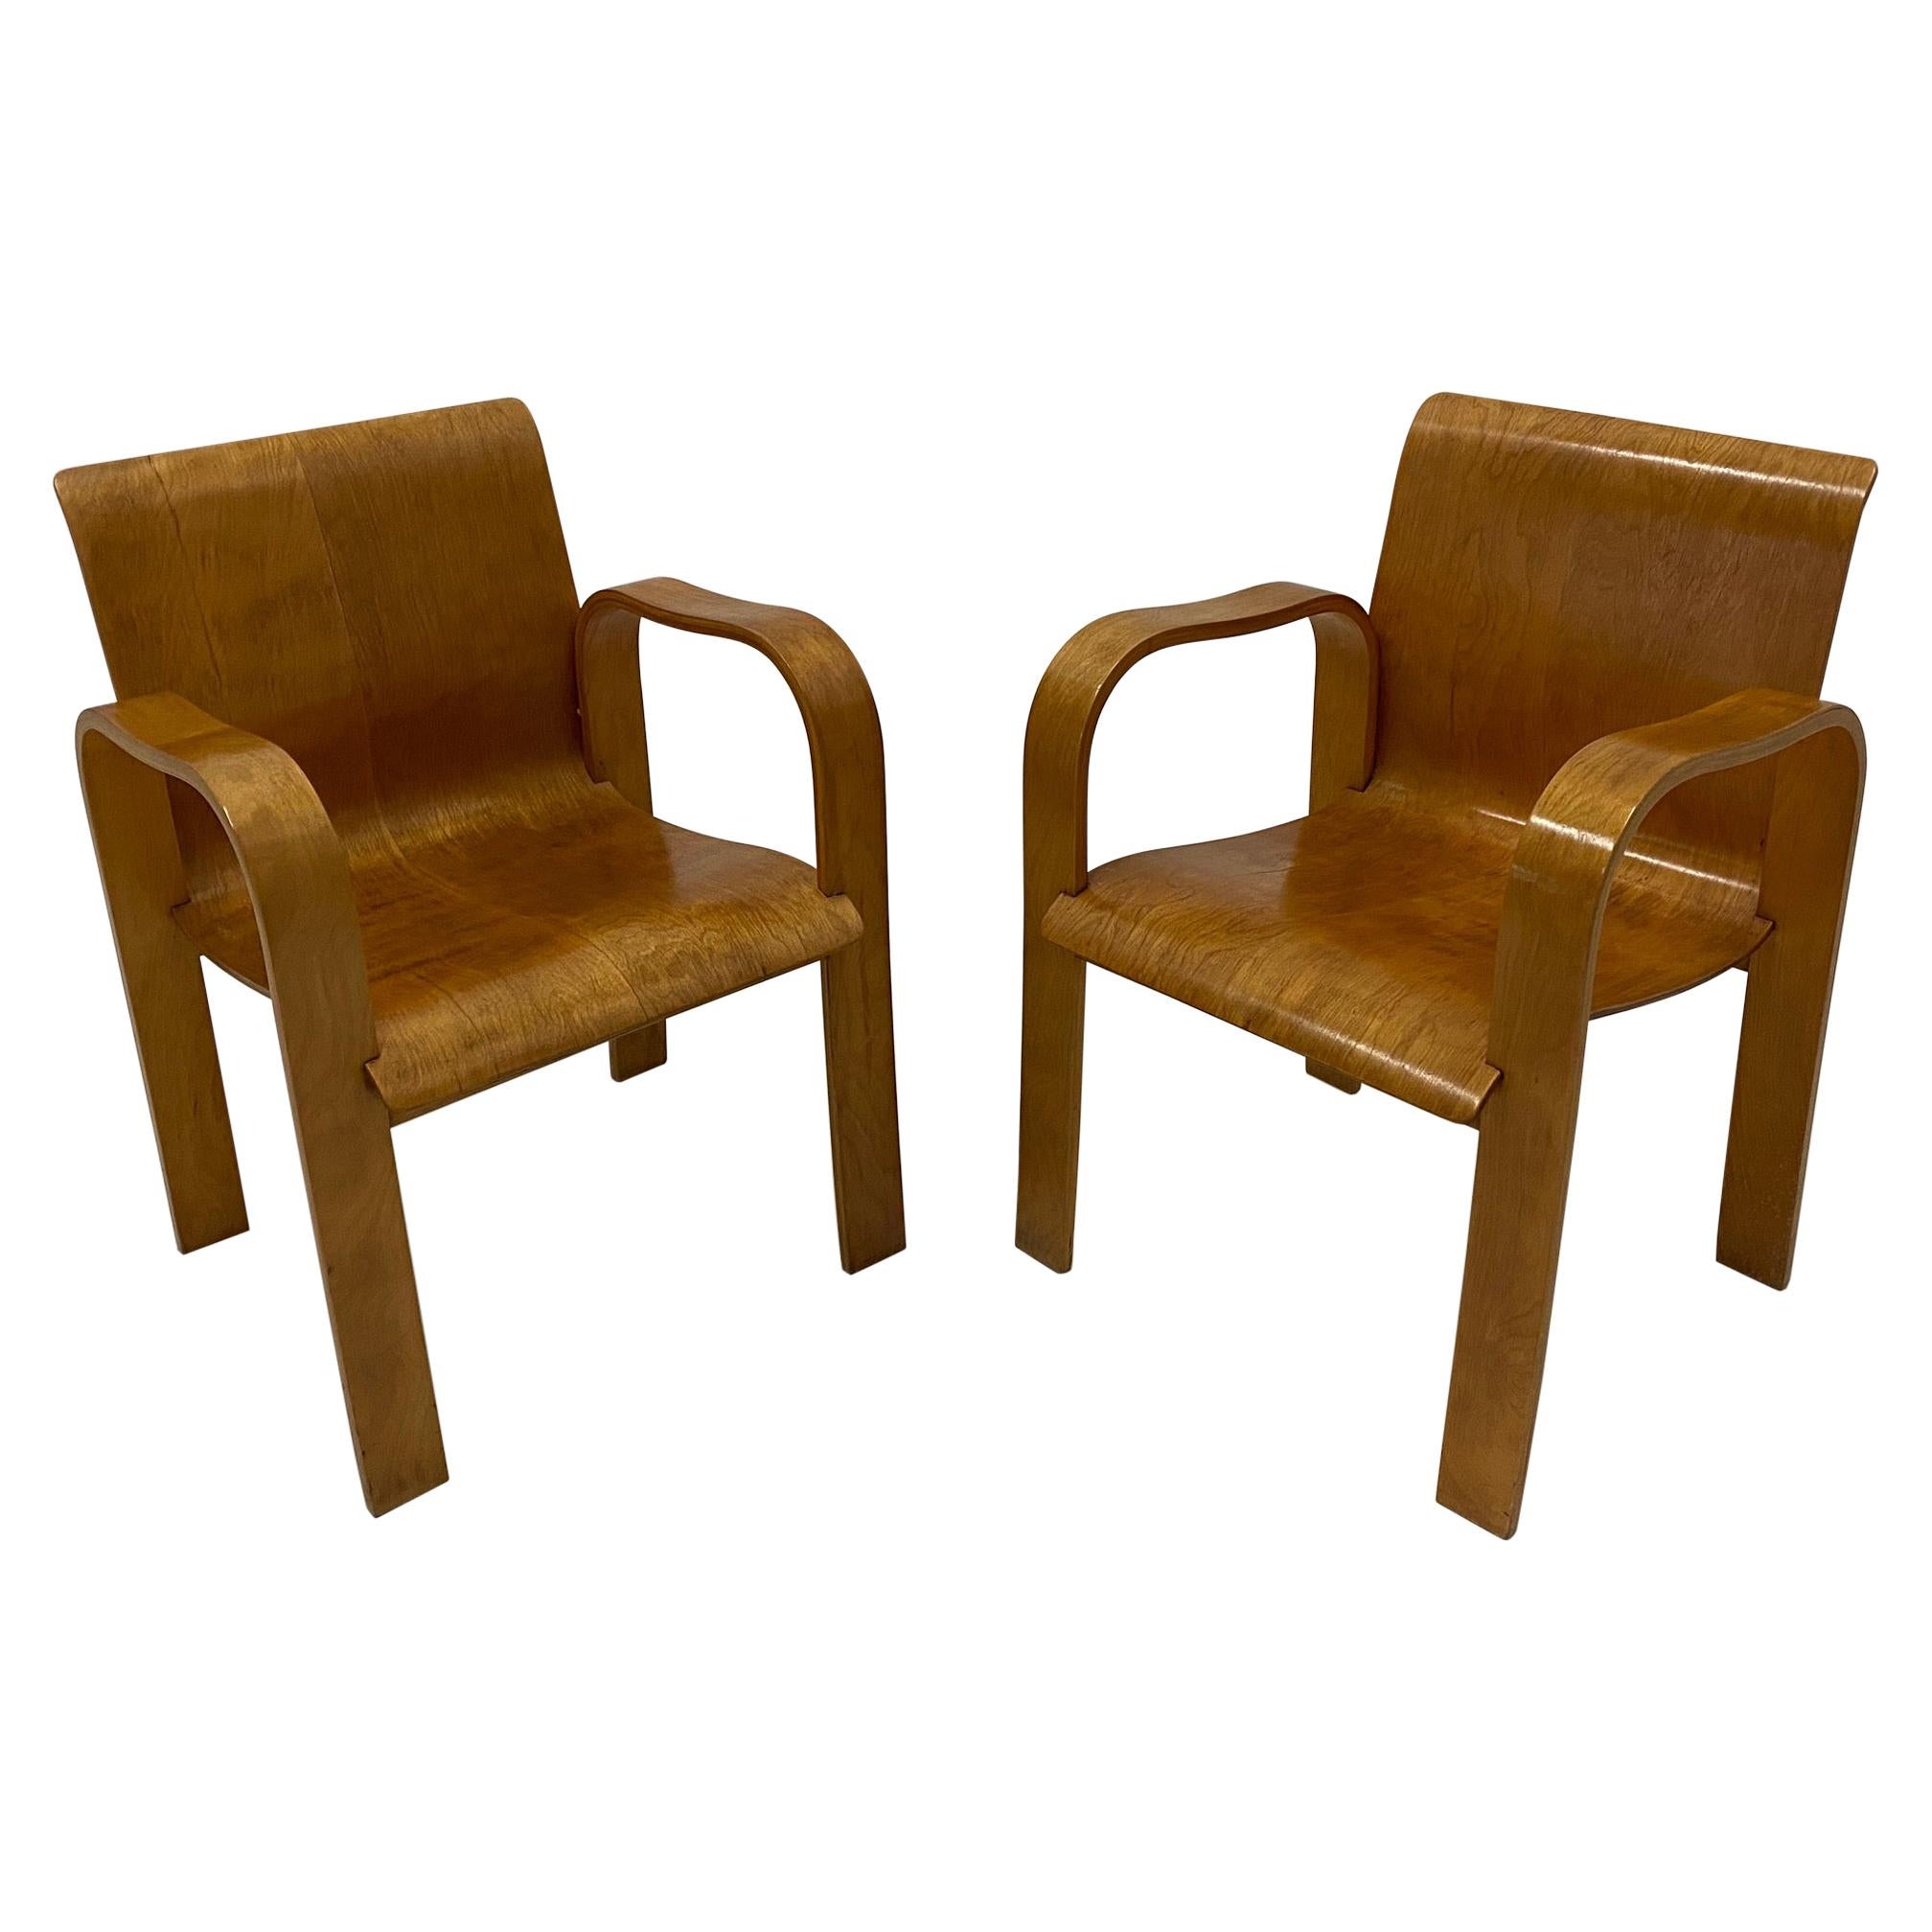 Rare Pair of Sleek Molded Plywood Mid-Century Modern Armchairs For Sale